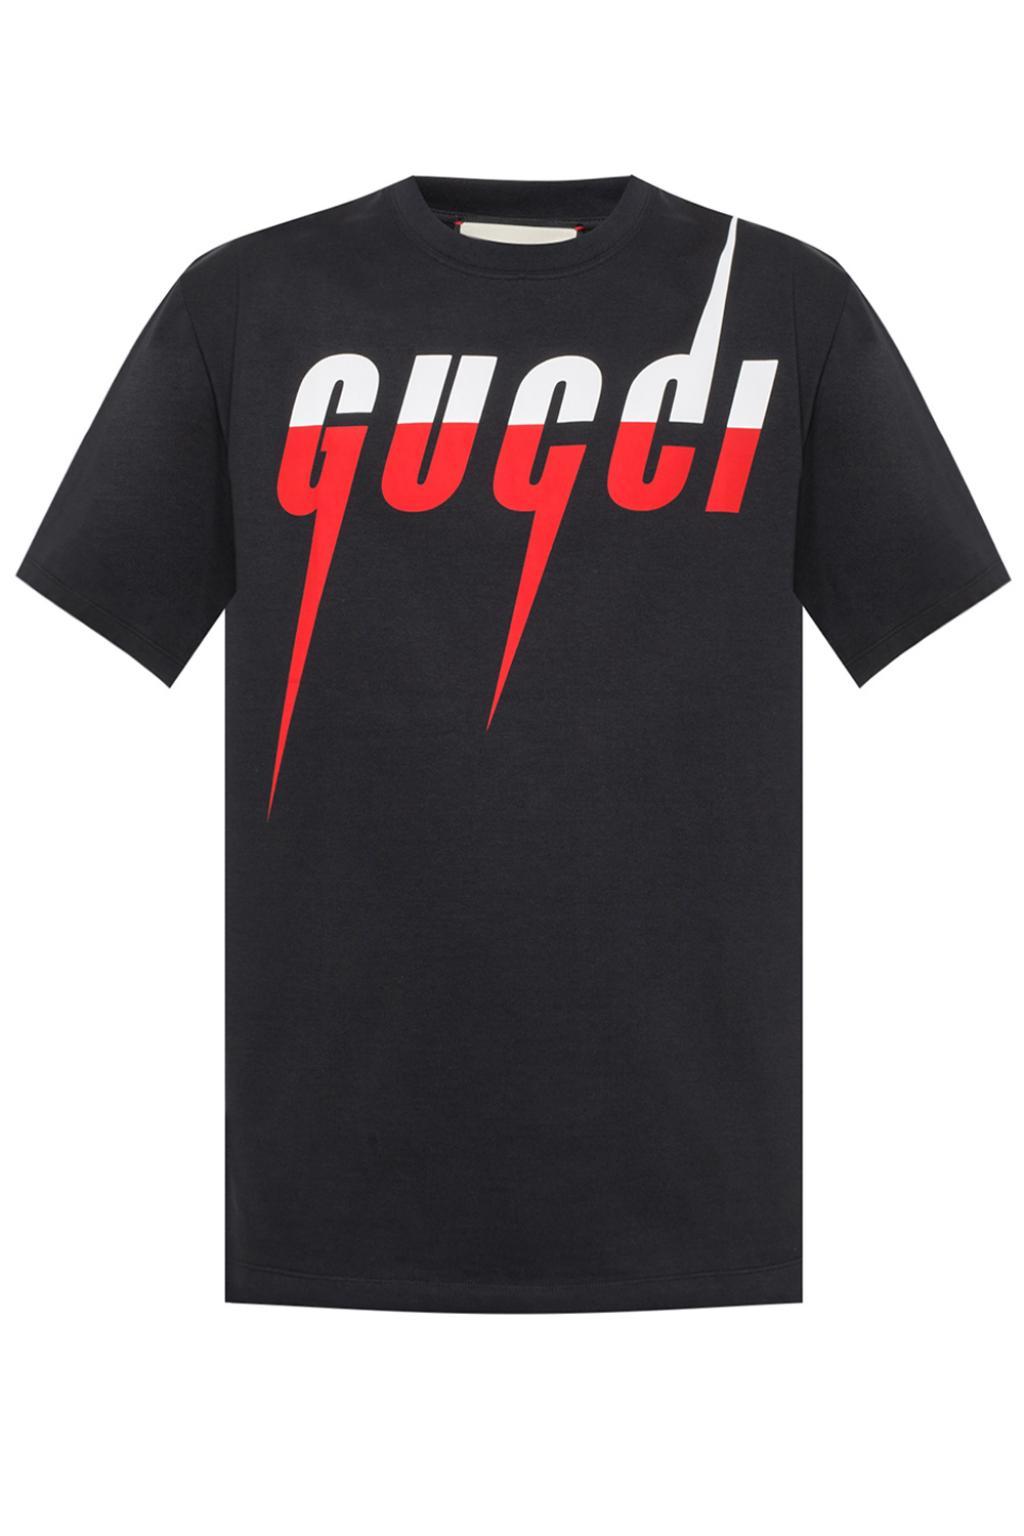 Gucci T-shirt With Blade Print in Black for Men | Lyst